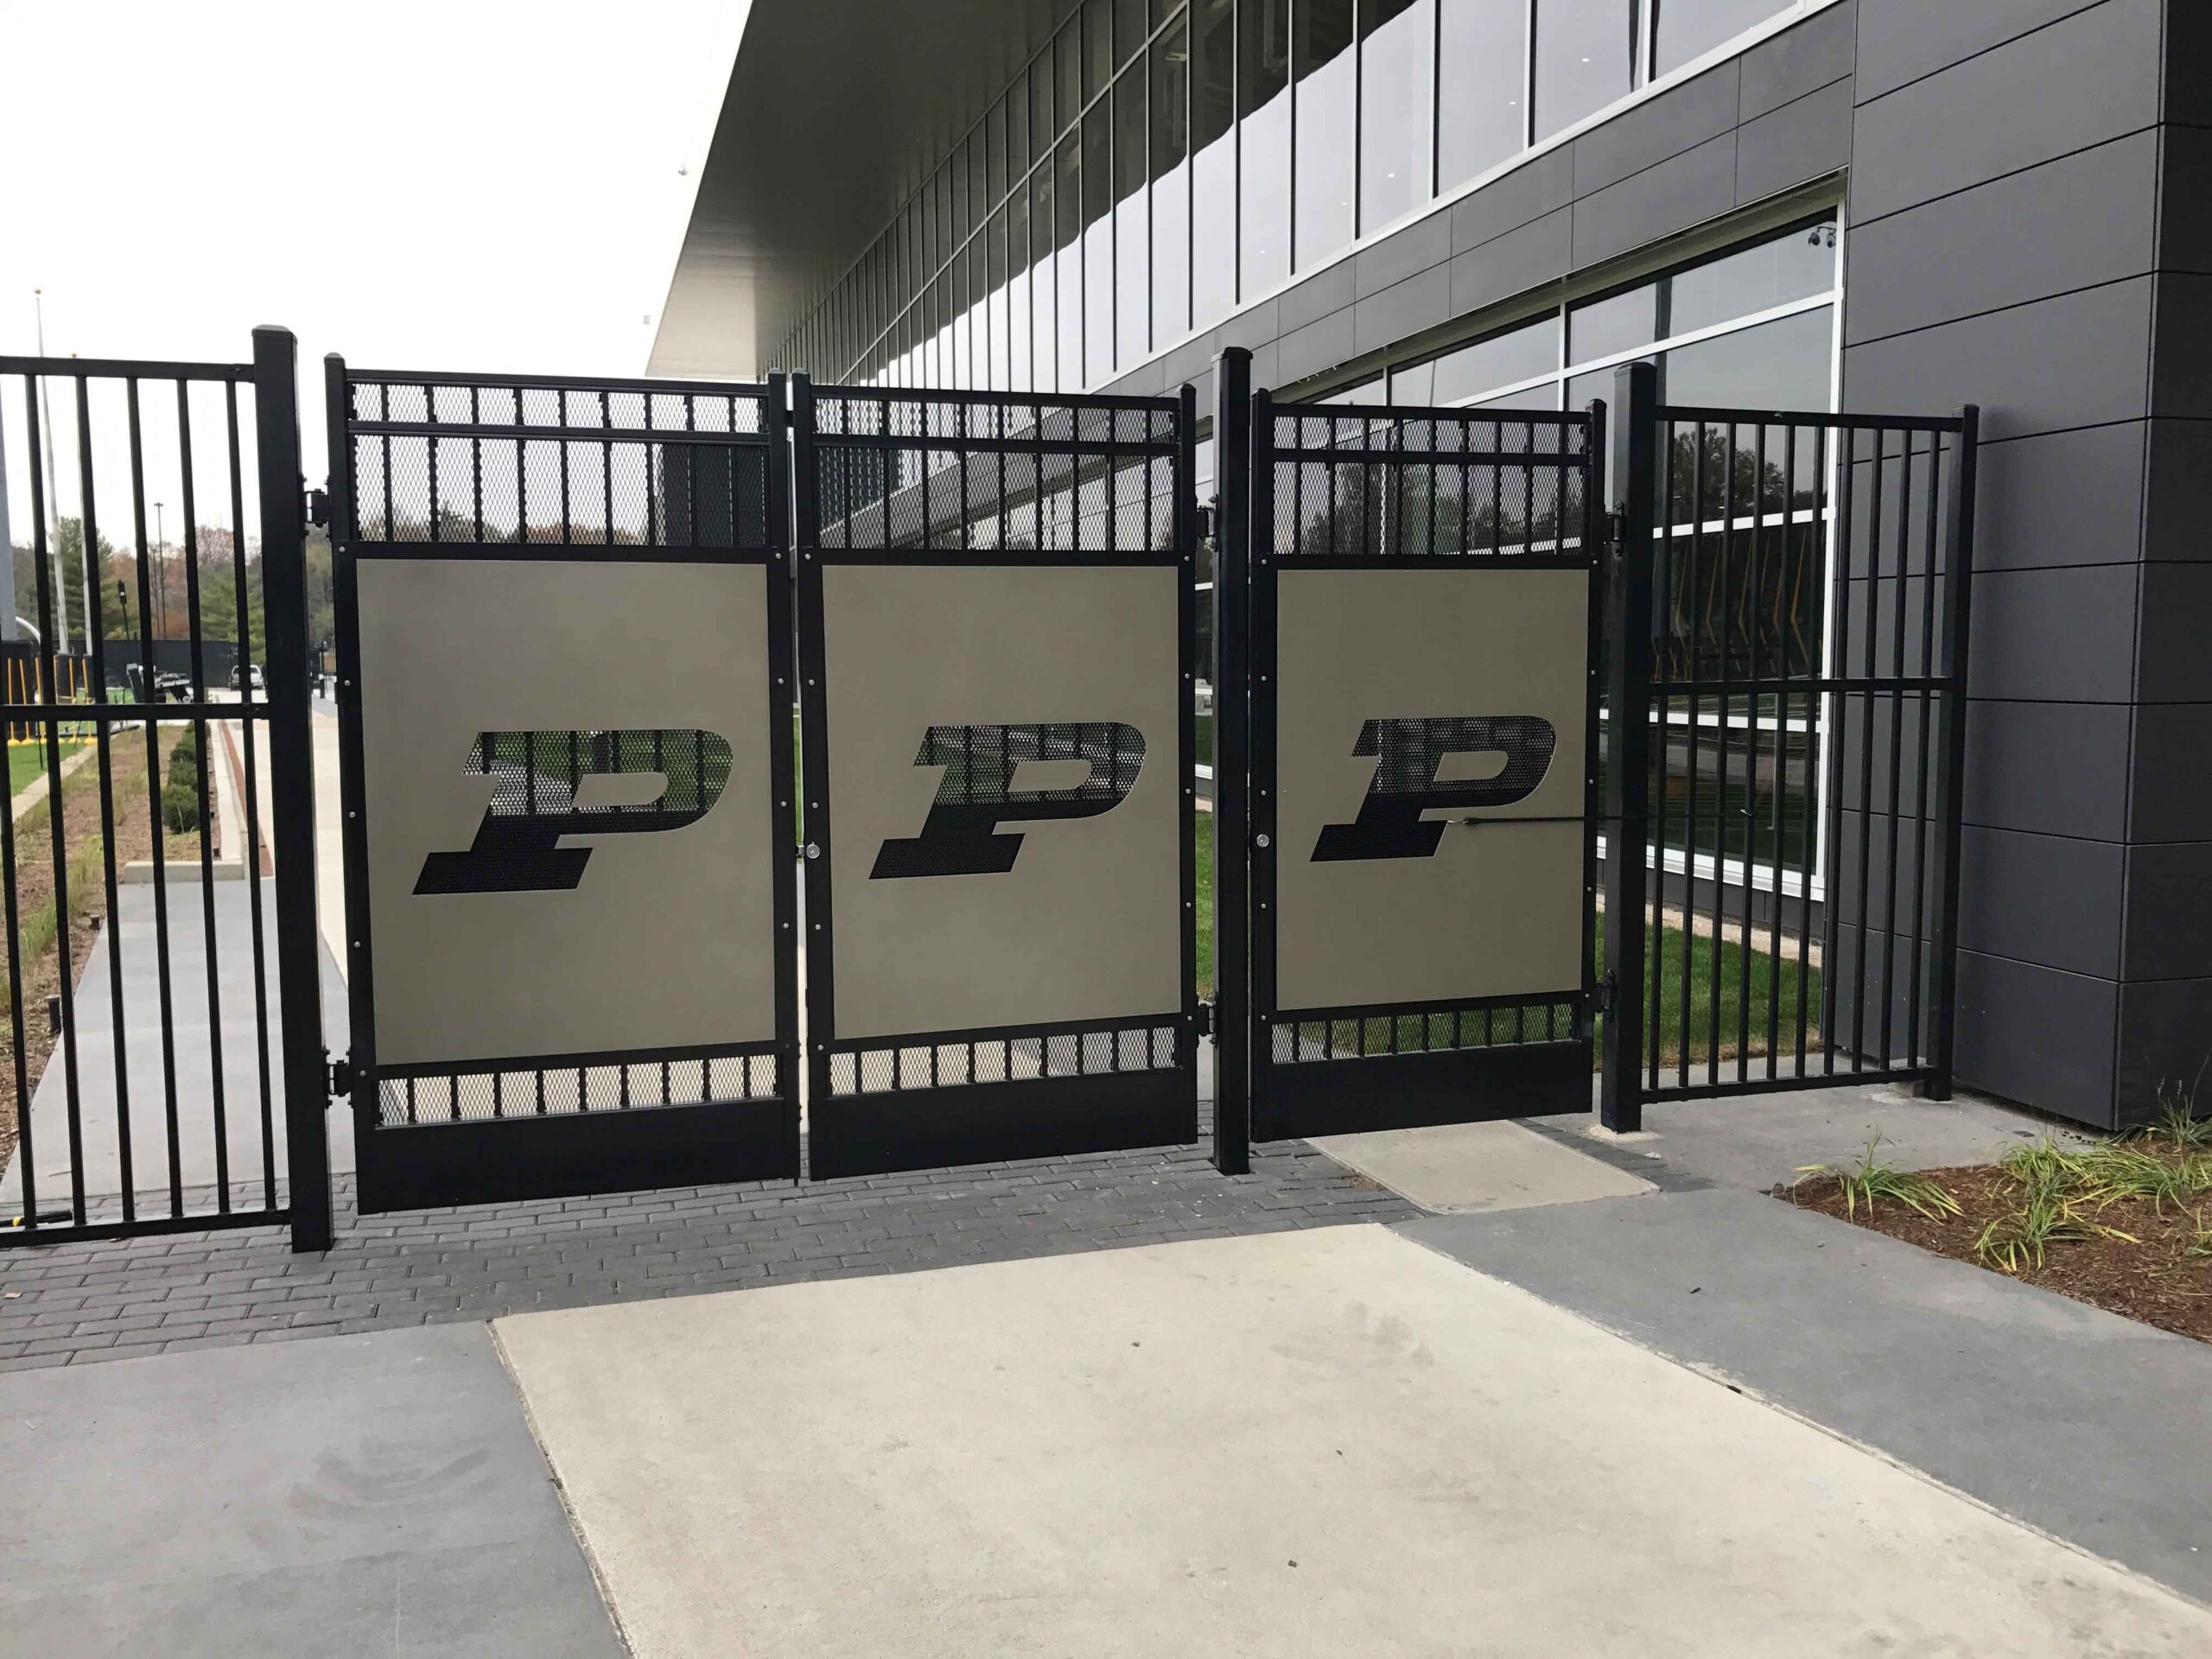 Purdue Boilermakers raised the bar with this custom swing gate project for their practice facilities next door to Ross-Ade Stadium. Interested in bringing this look to your local university, school, or sports complex? Let us help you elevate your project to the next level!

